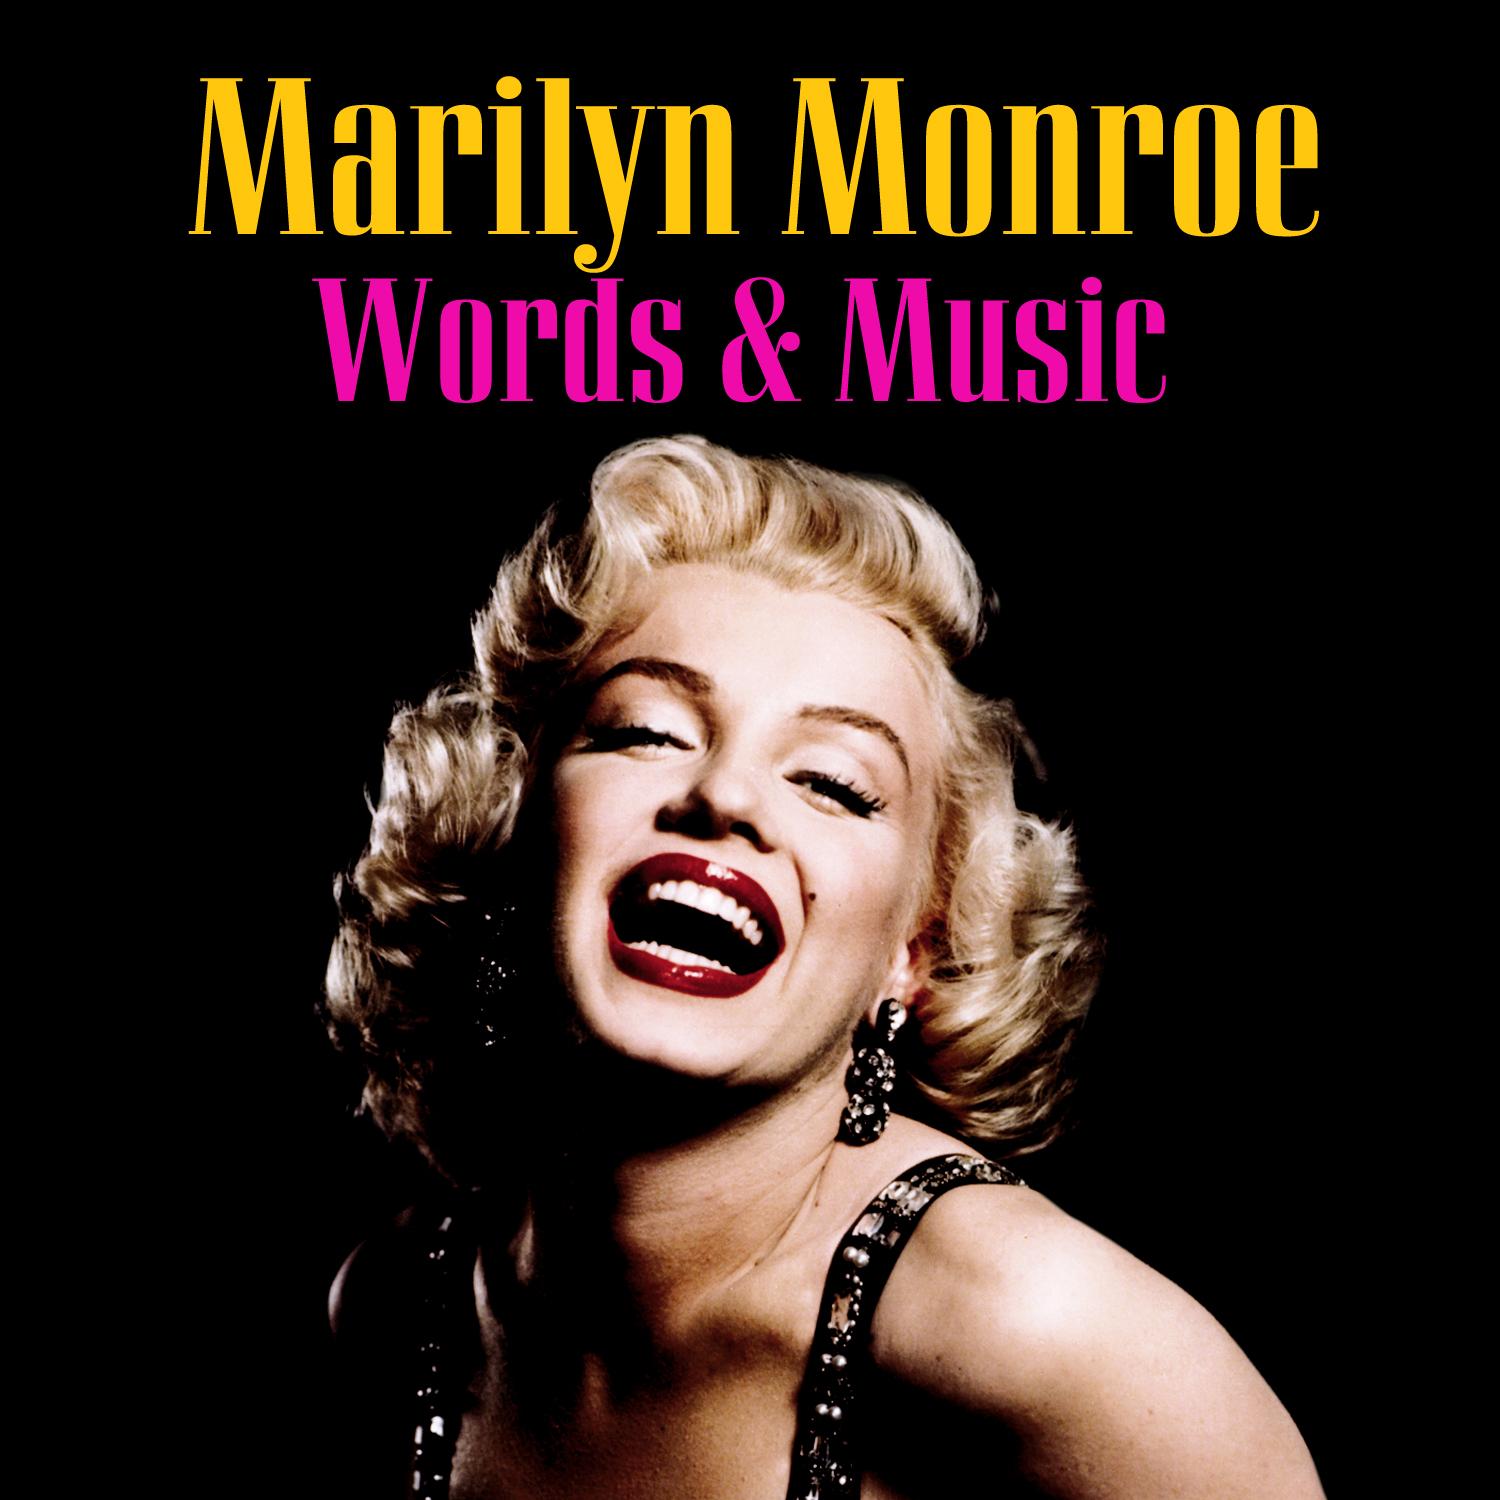 Marilyn Monroe Words and Music